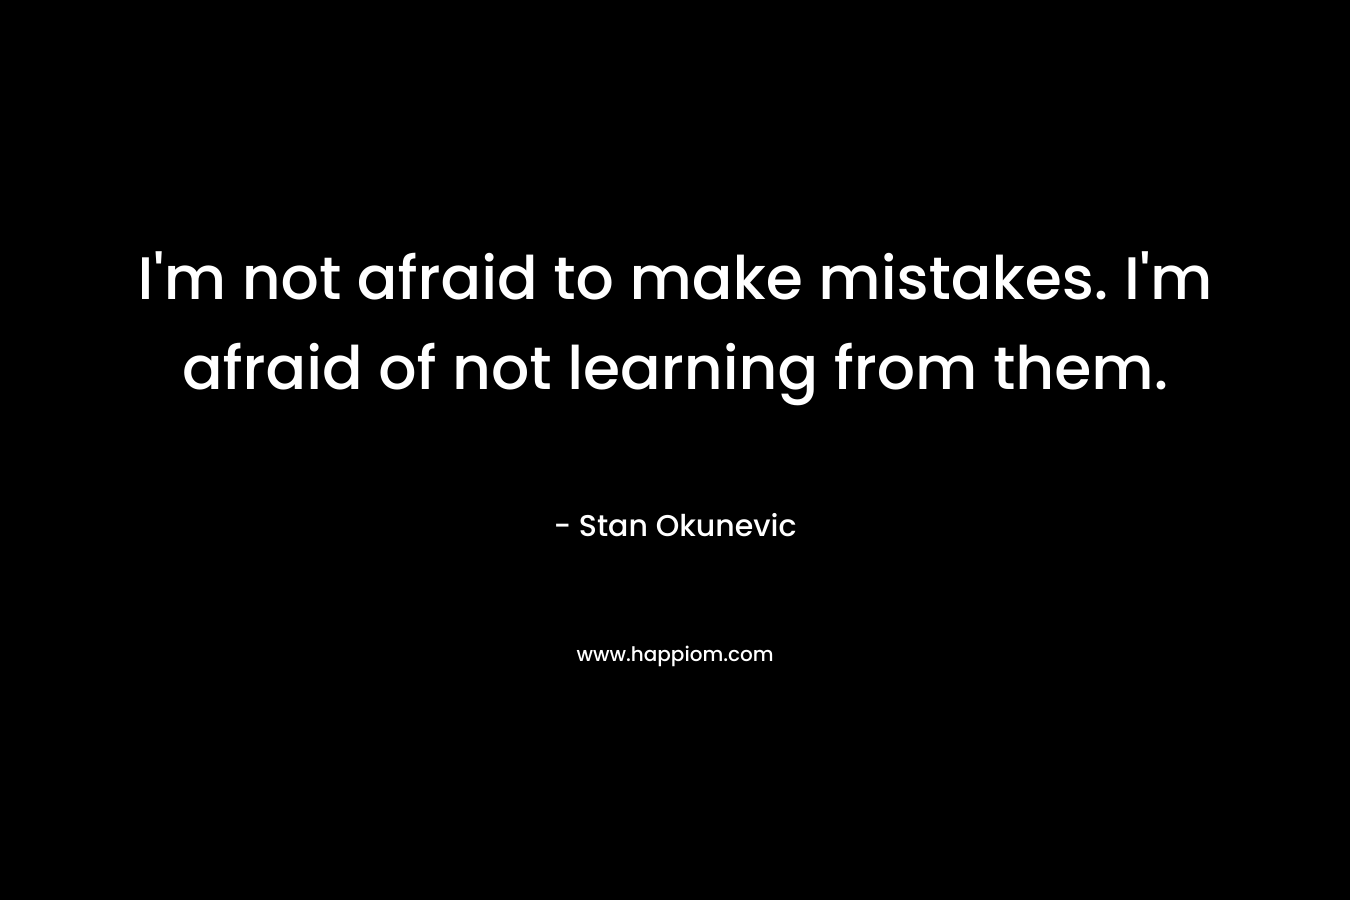 I'm not afraid to make mistakes. I'm afraid of not learning from them.